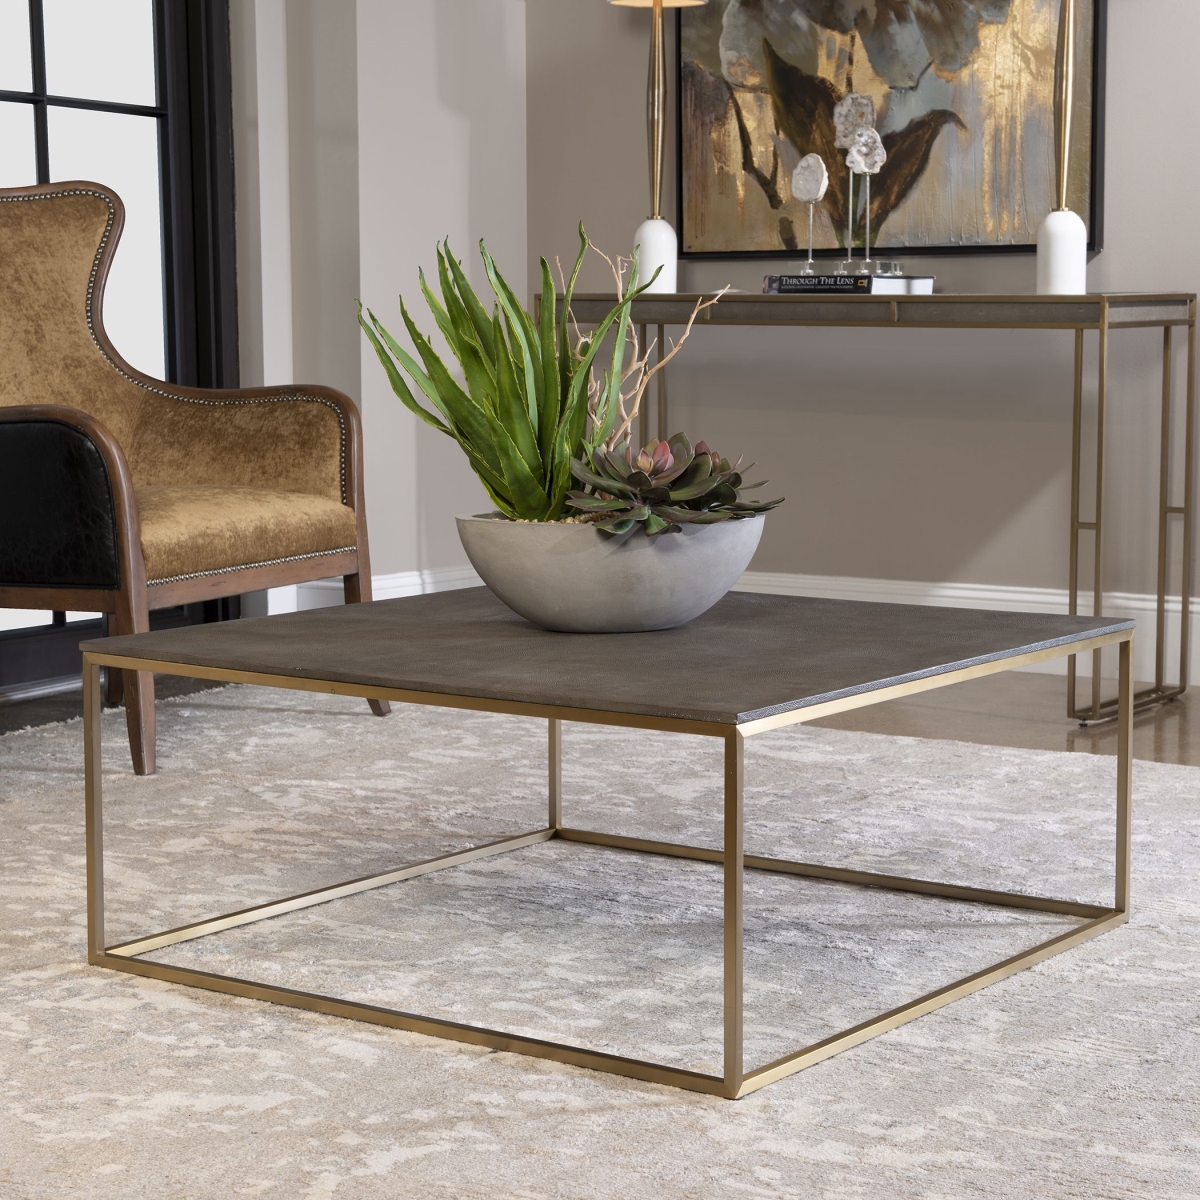 Picture of 212 Main 25370 24 x 40 x 46 in. Trebon Modern Coffee Table